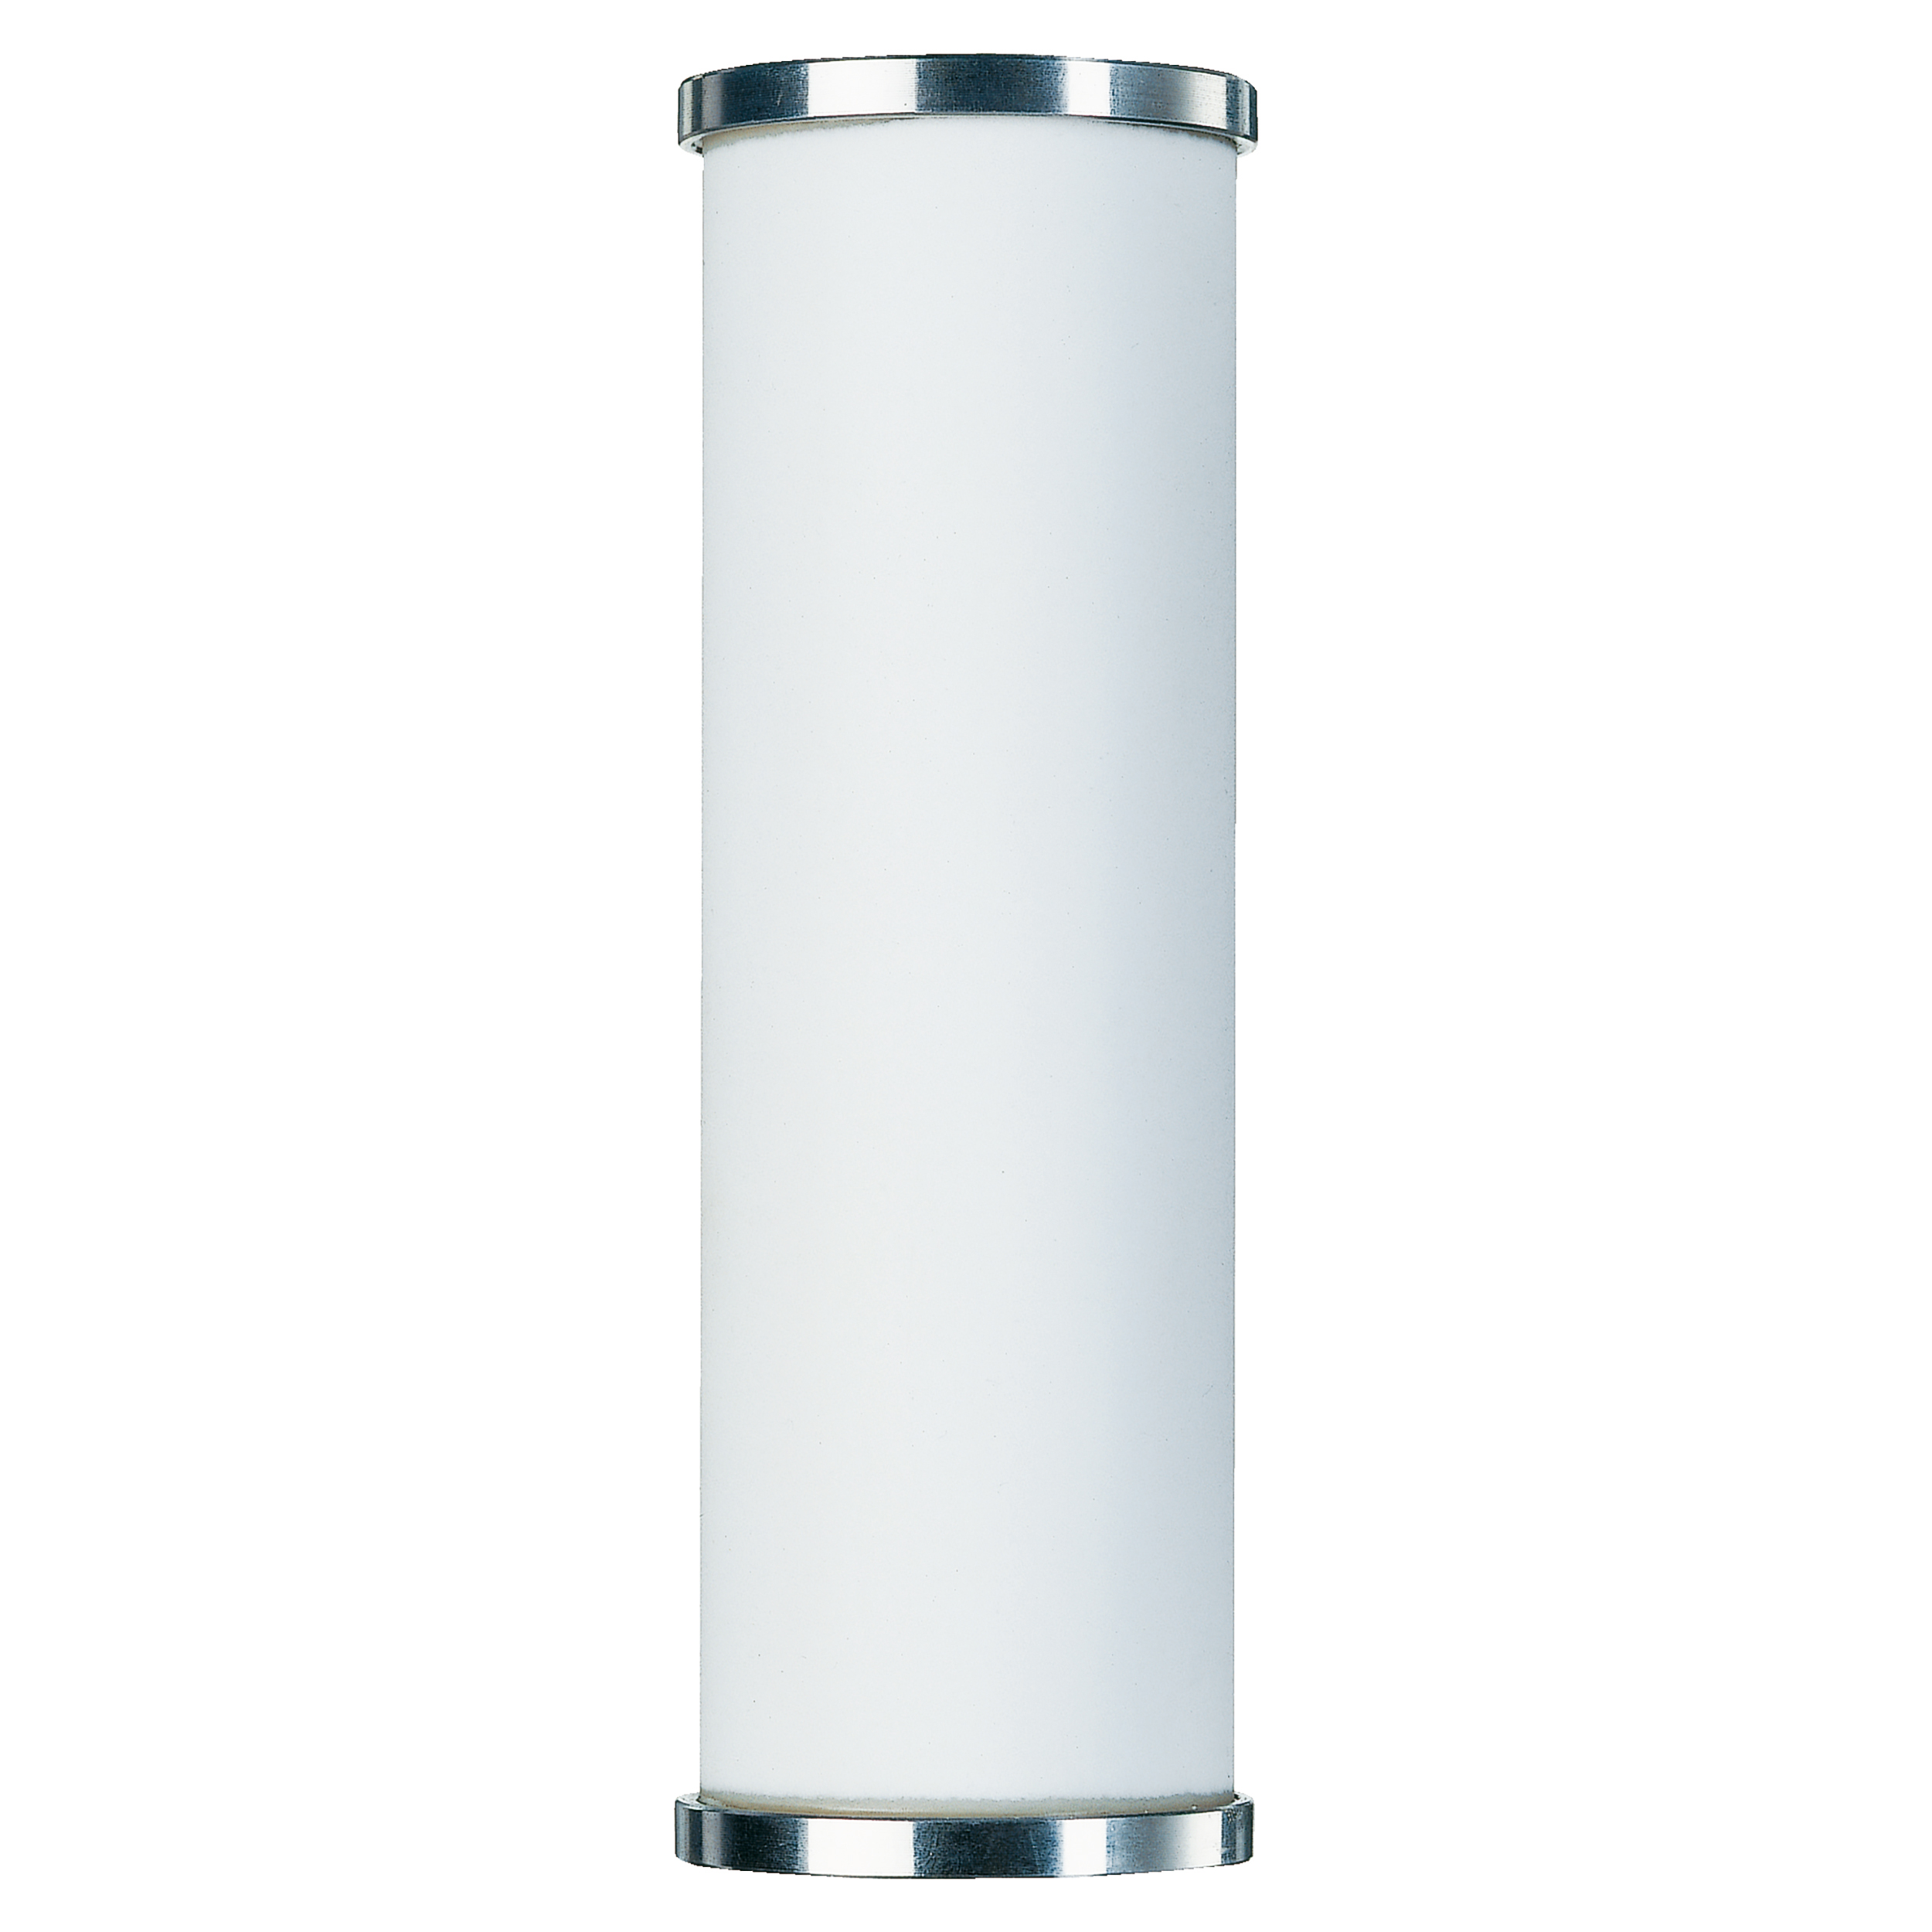 Pre-filter insert, vma BG 90-4, A: Ø71 mm, B1: Ø48 mm, B2: Ø12 mm, C (height): 500 mm,XR